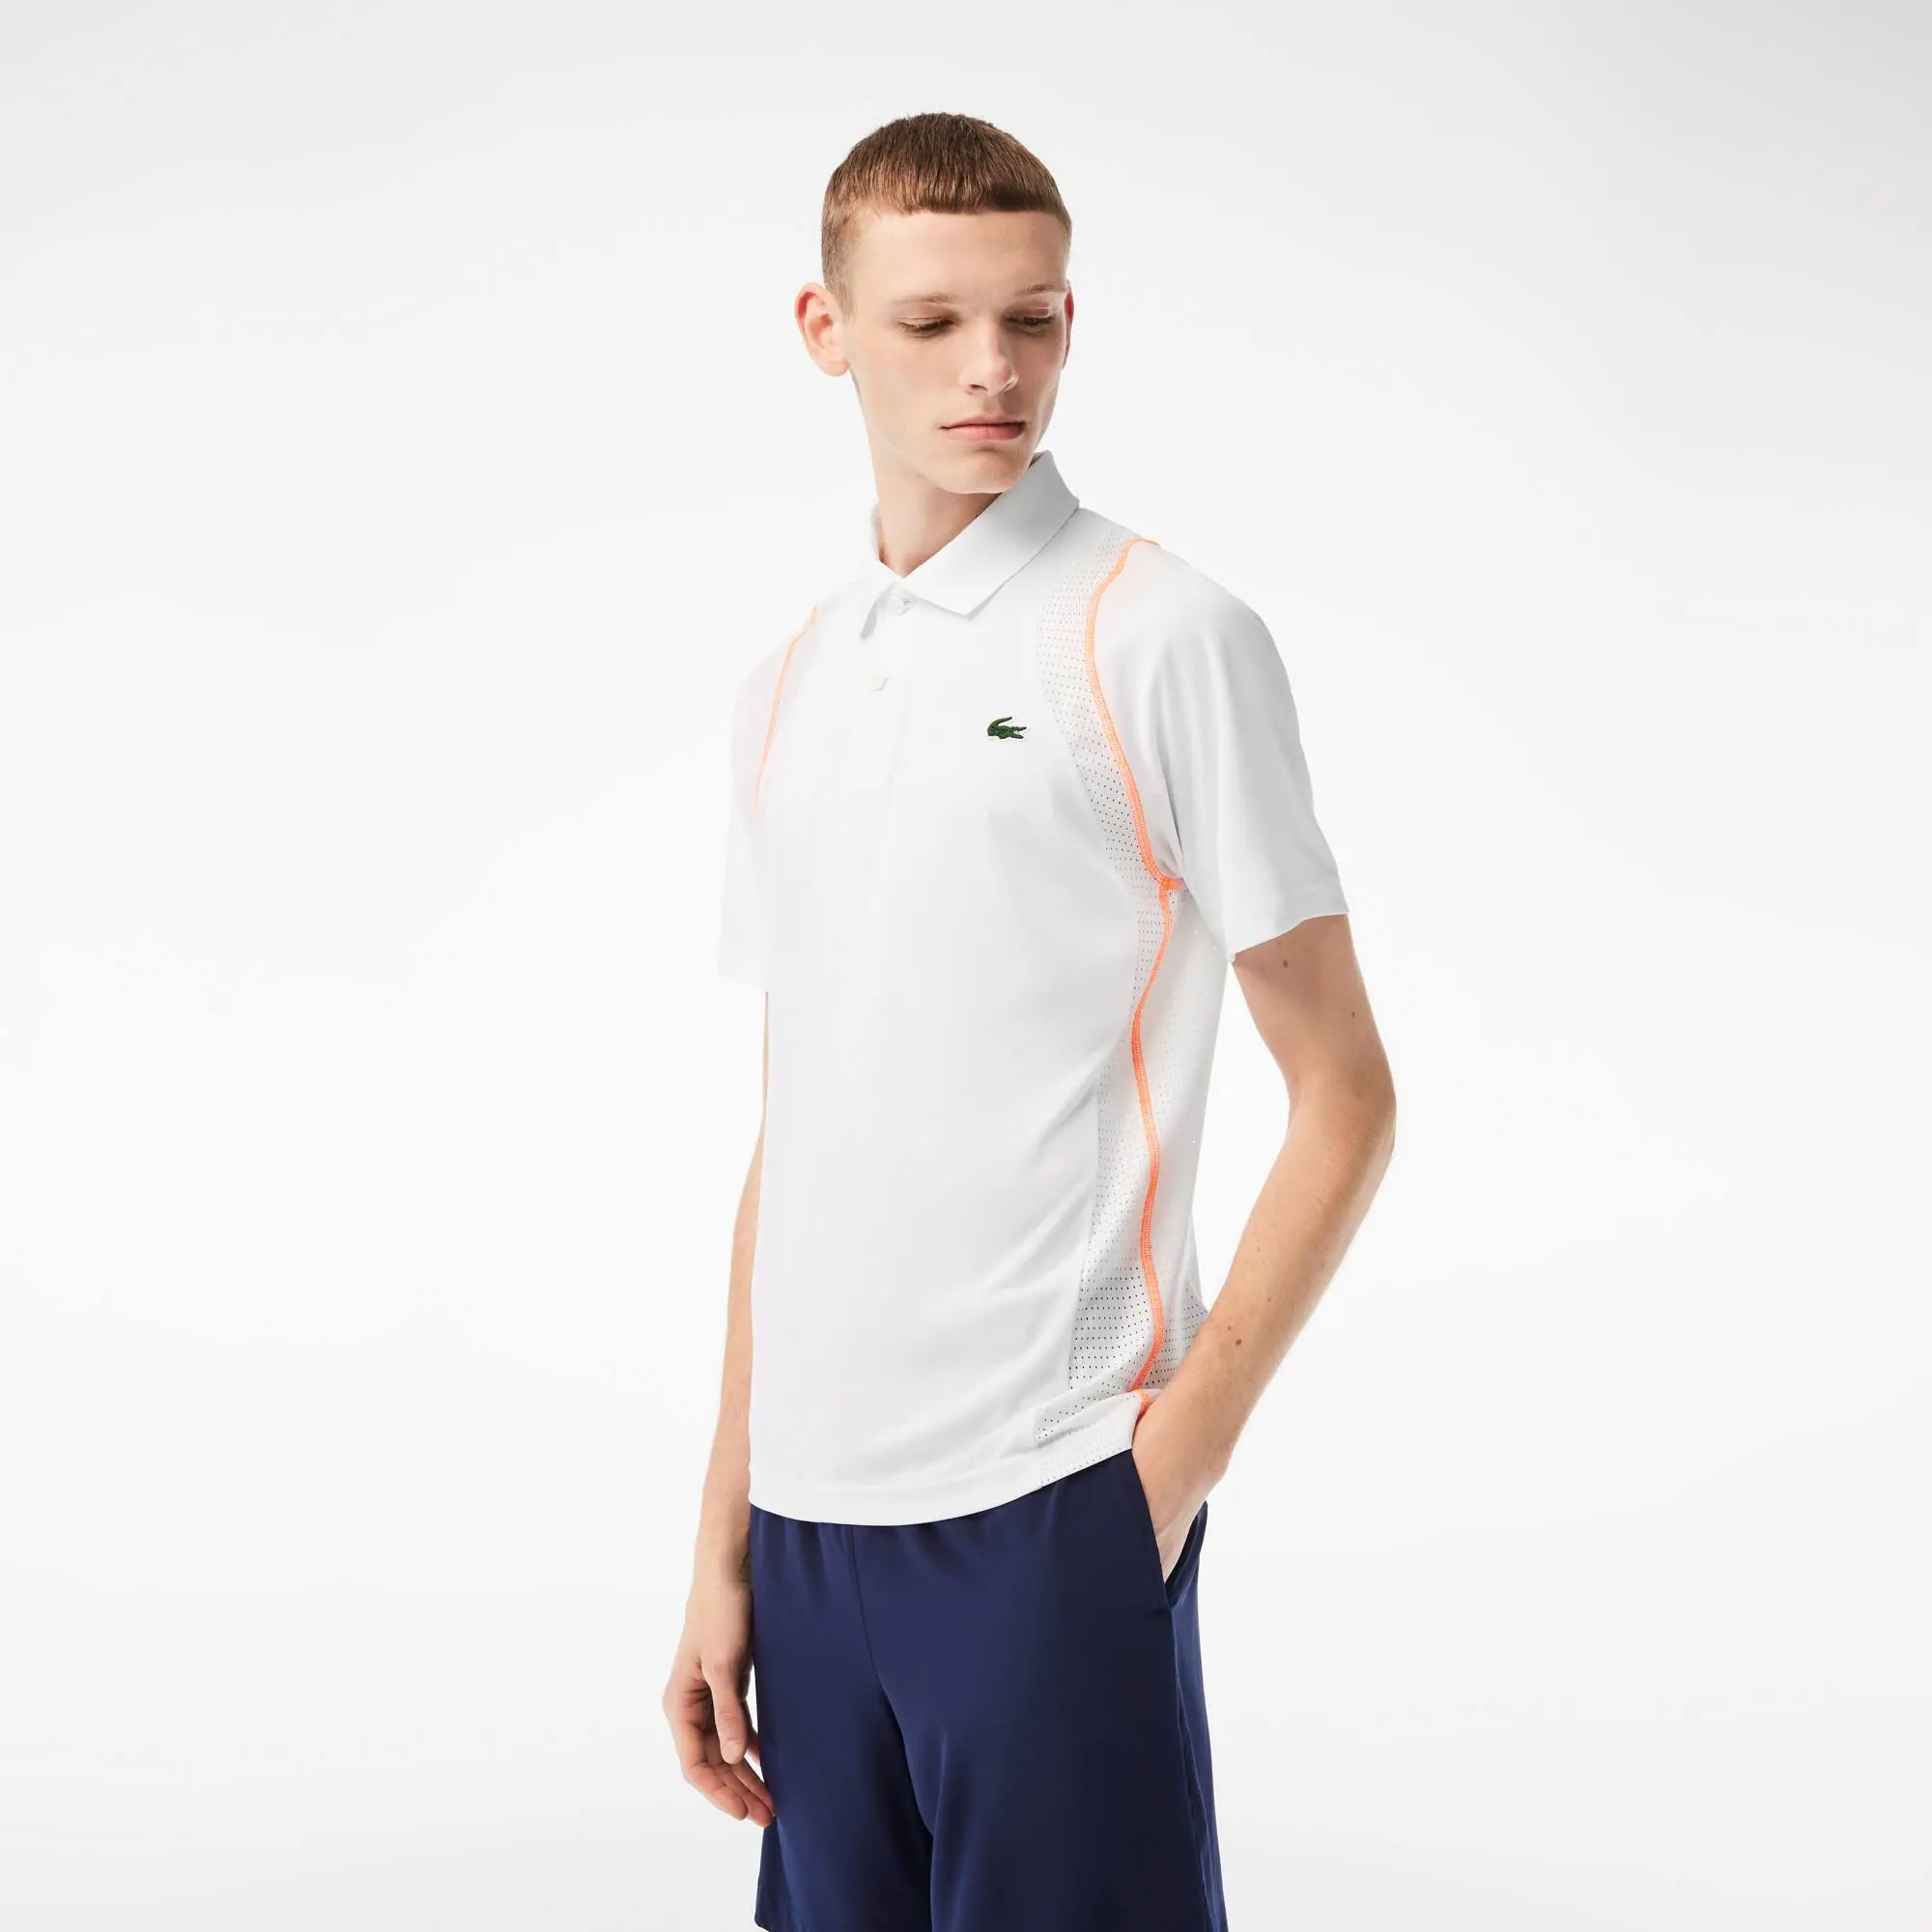 Lacoste Men’s Lacoste Tennis Recycled Polyester Polo Shirt. 1